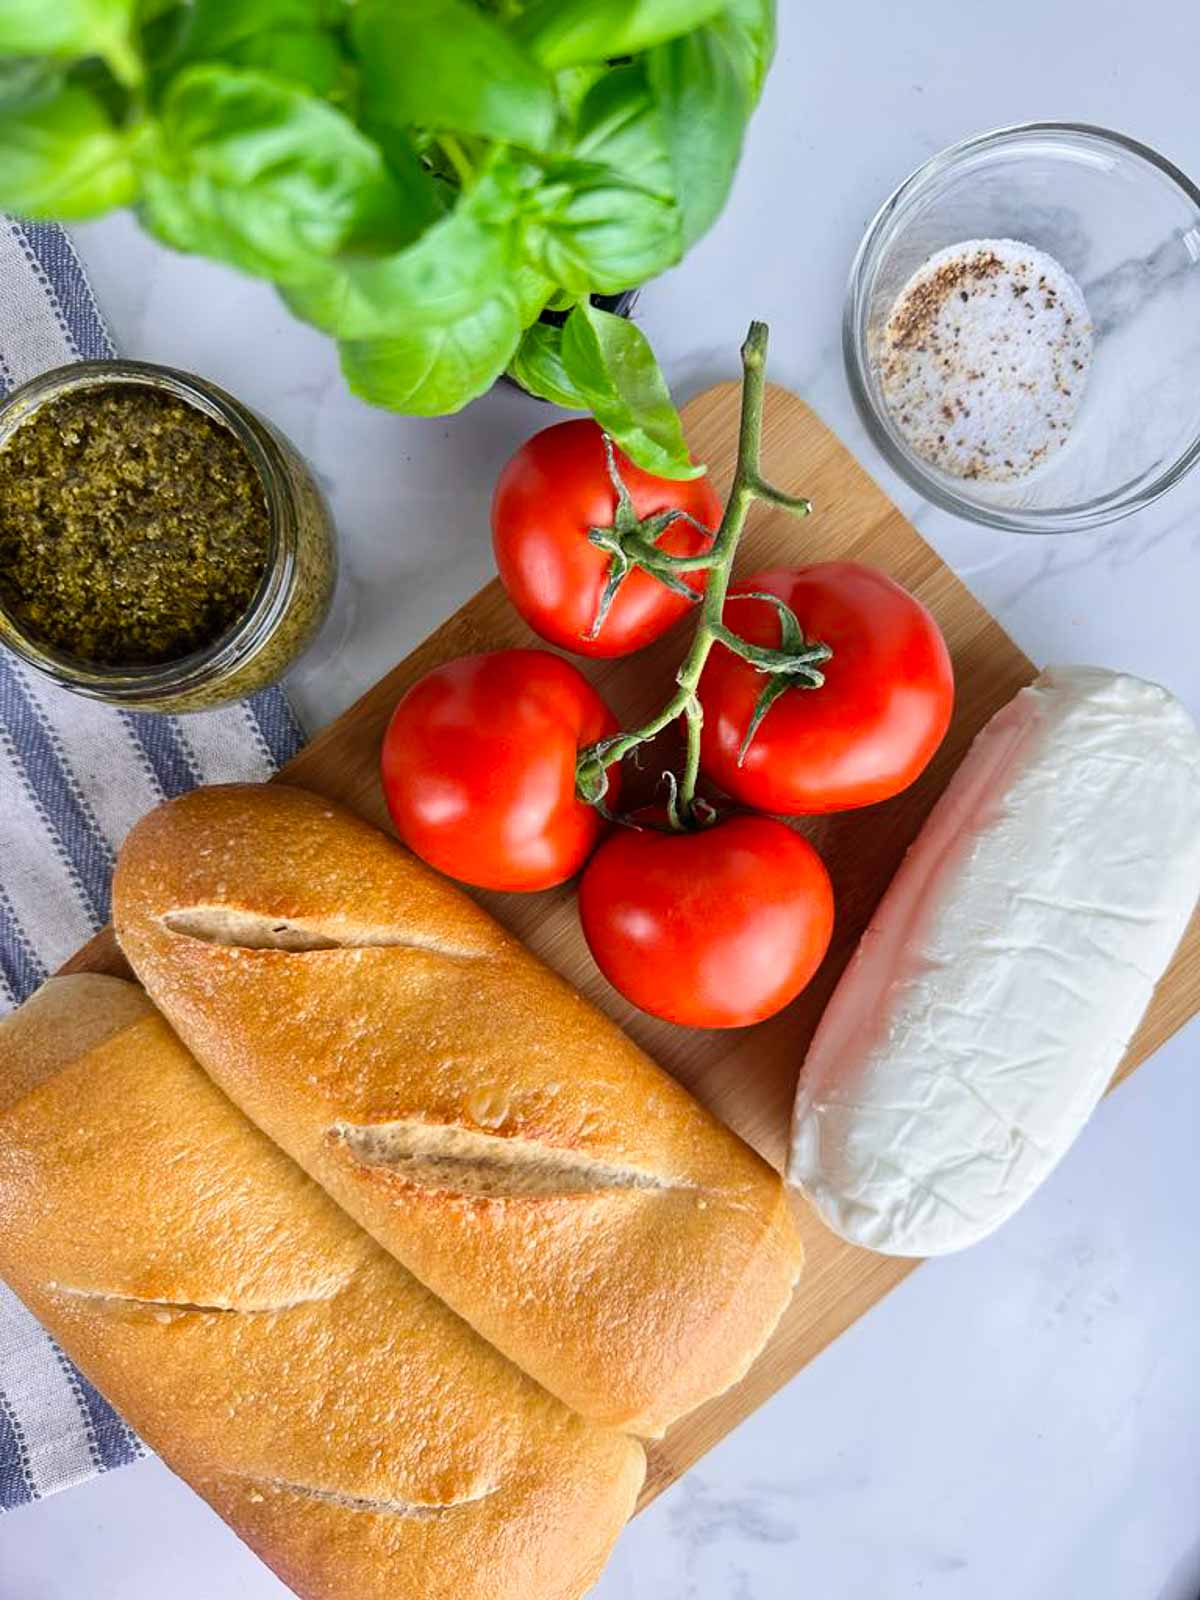 Ingredients for Baguette Caprese Sandwich with Pesto: Baguettes, Tomatoes, Pesto, Fresh Basil, Fresh Mozzarella, and Salt and Pepper